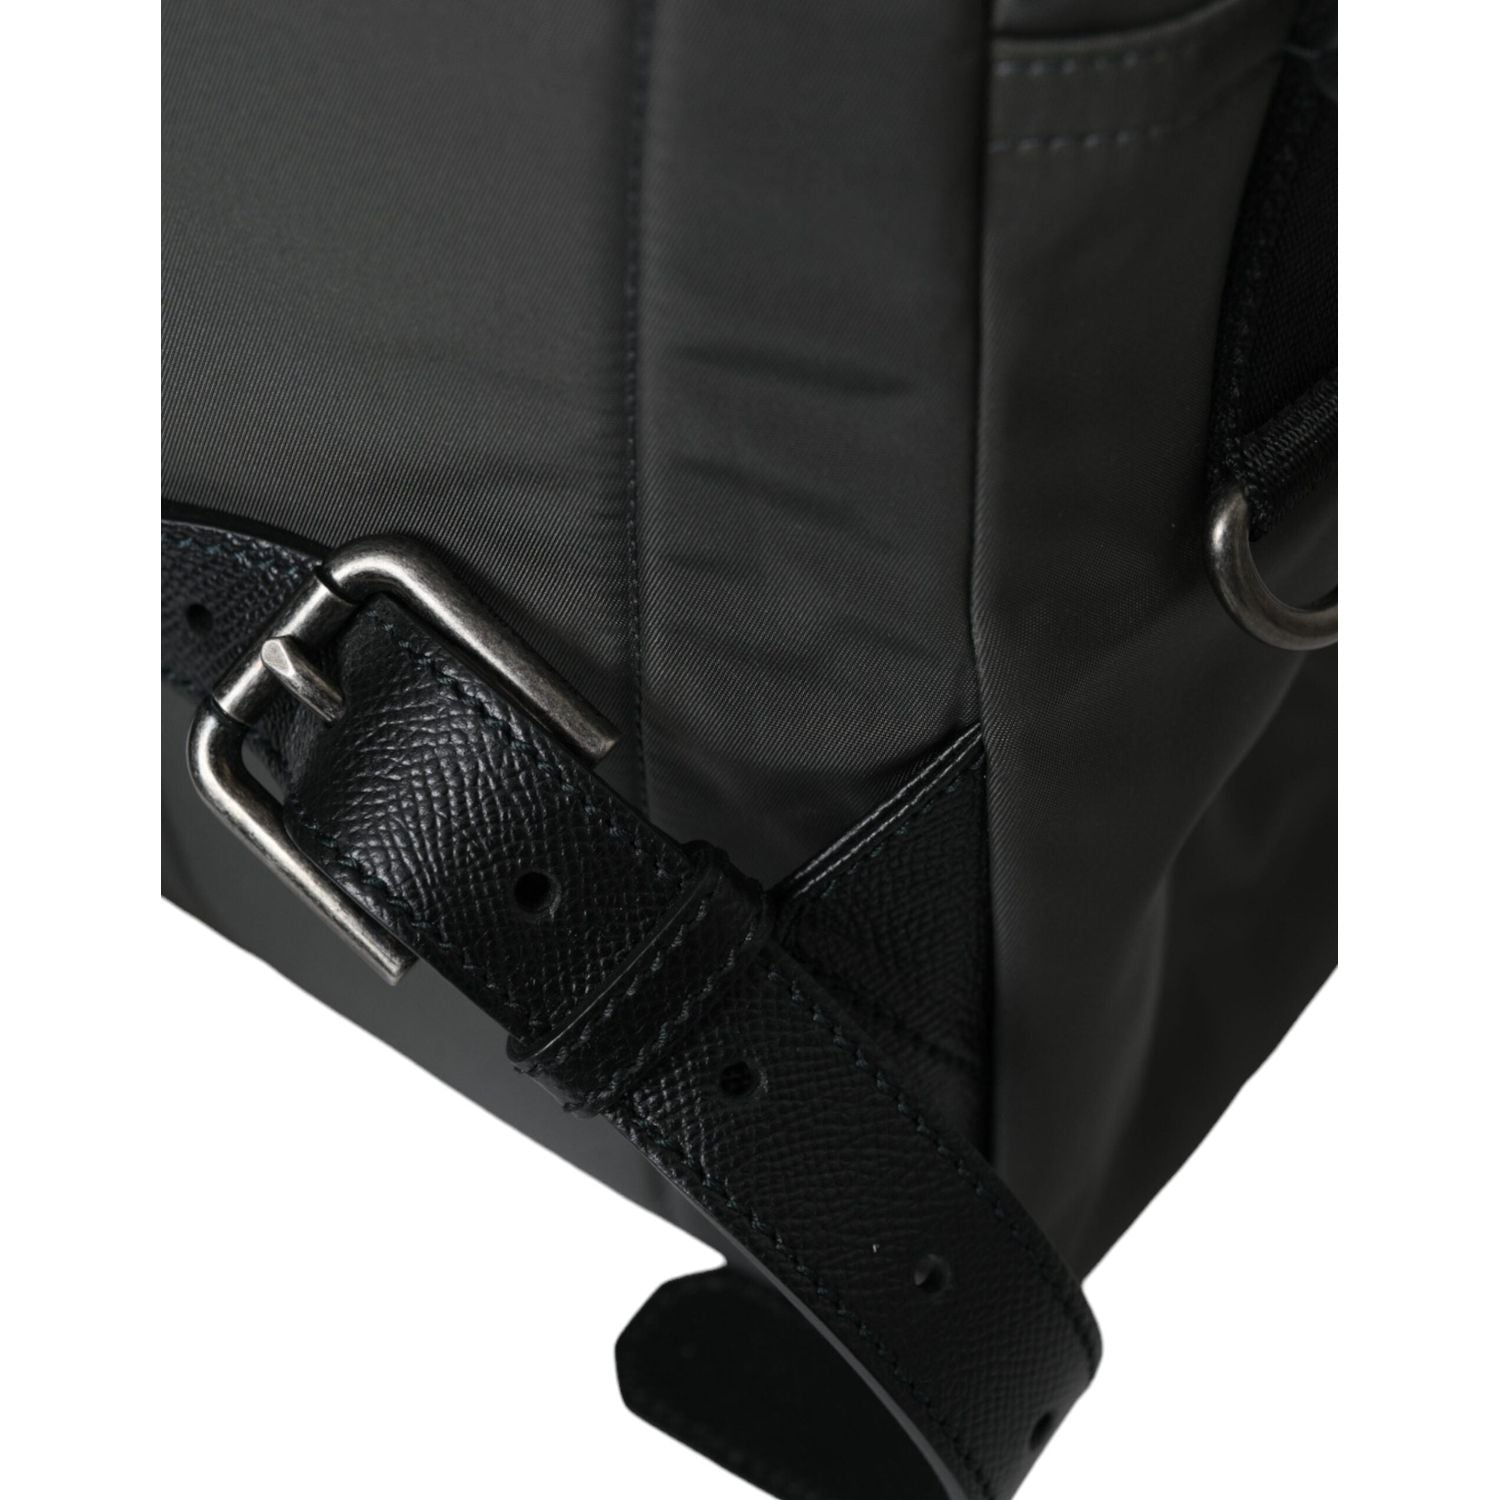 Front view with bag zipped and handles upright.